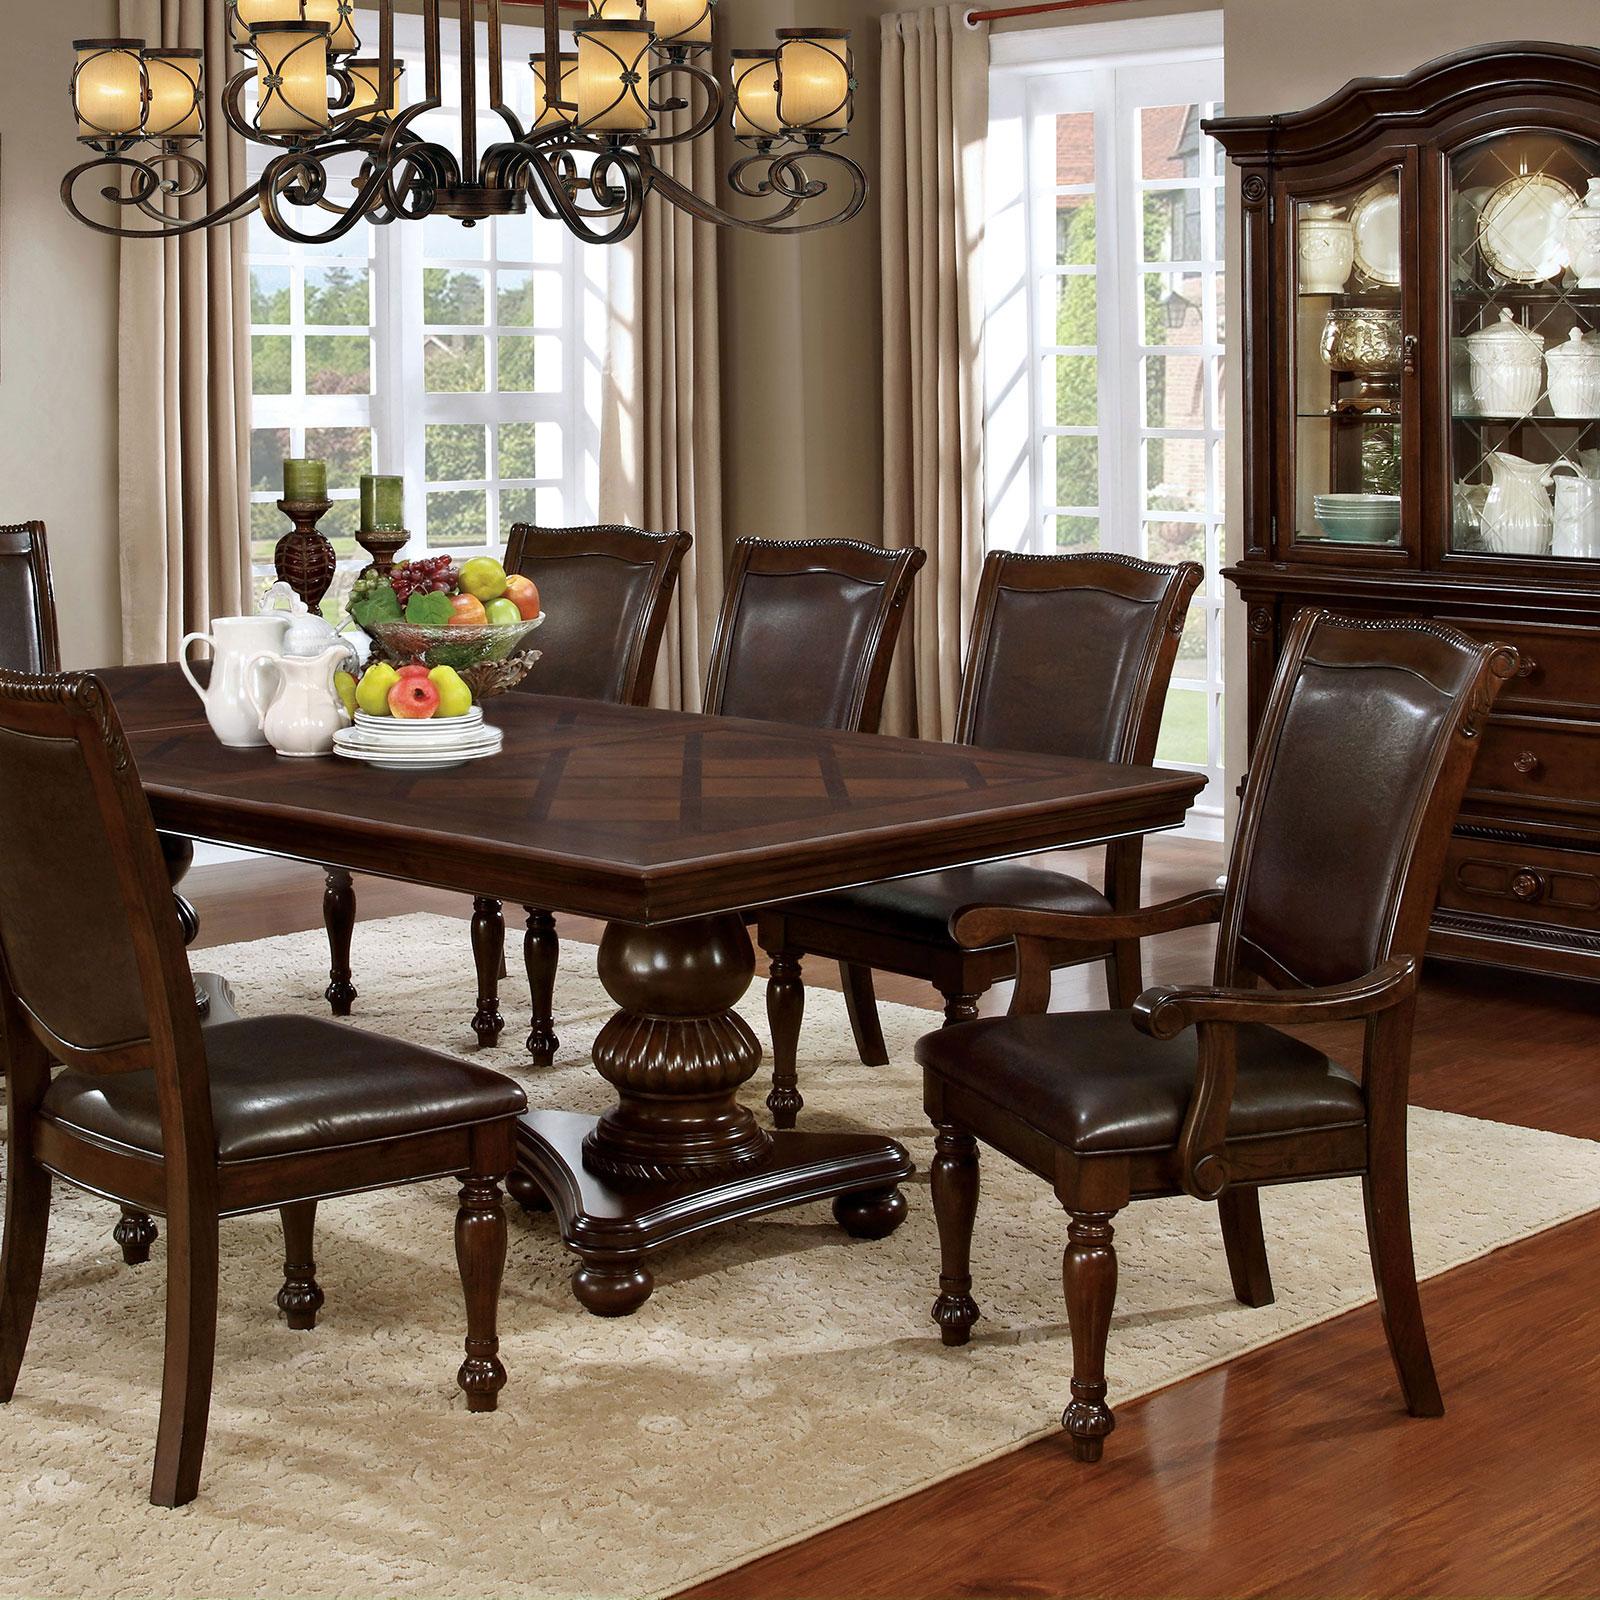 

    
Transitional Brown Cherry & Espresso Solid Wood Dining Room Set 10pcs Furniture of America Alpena
